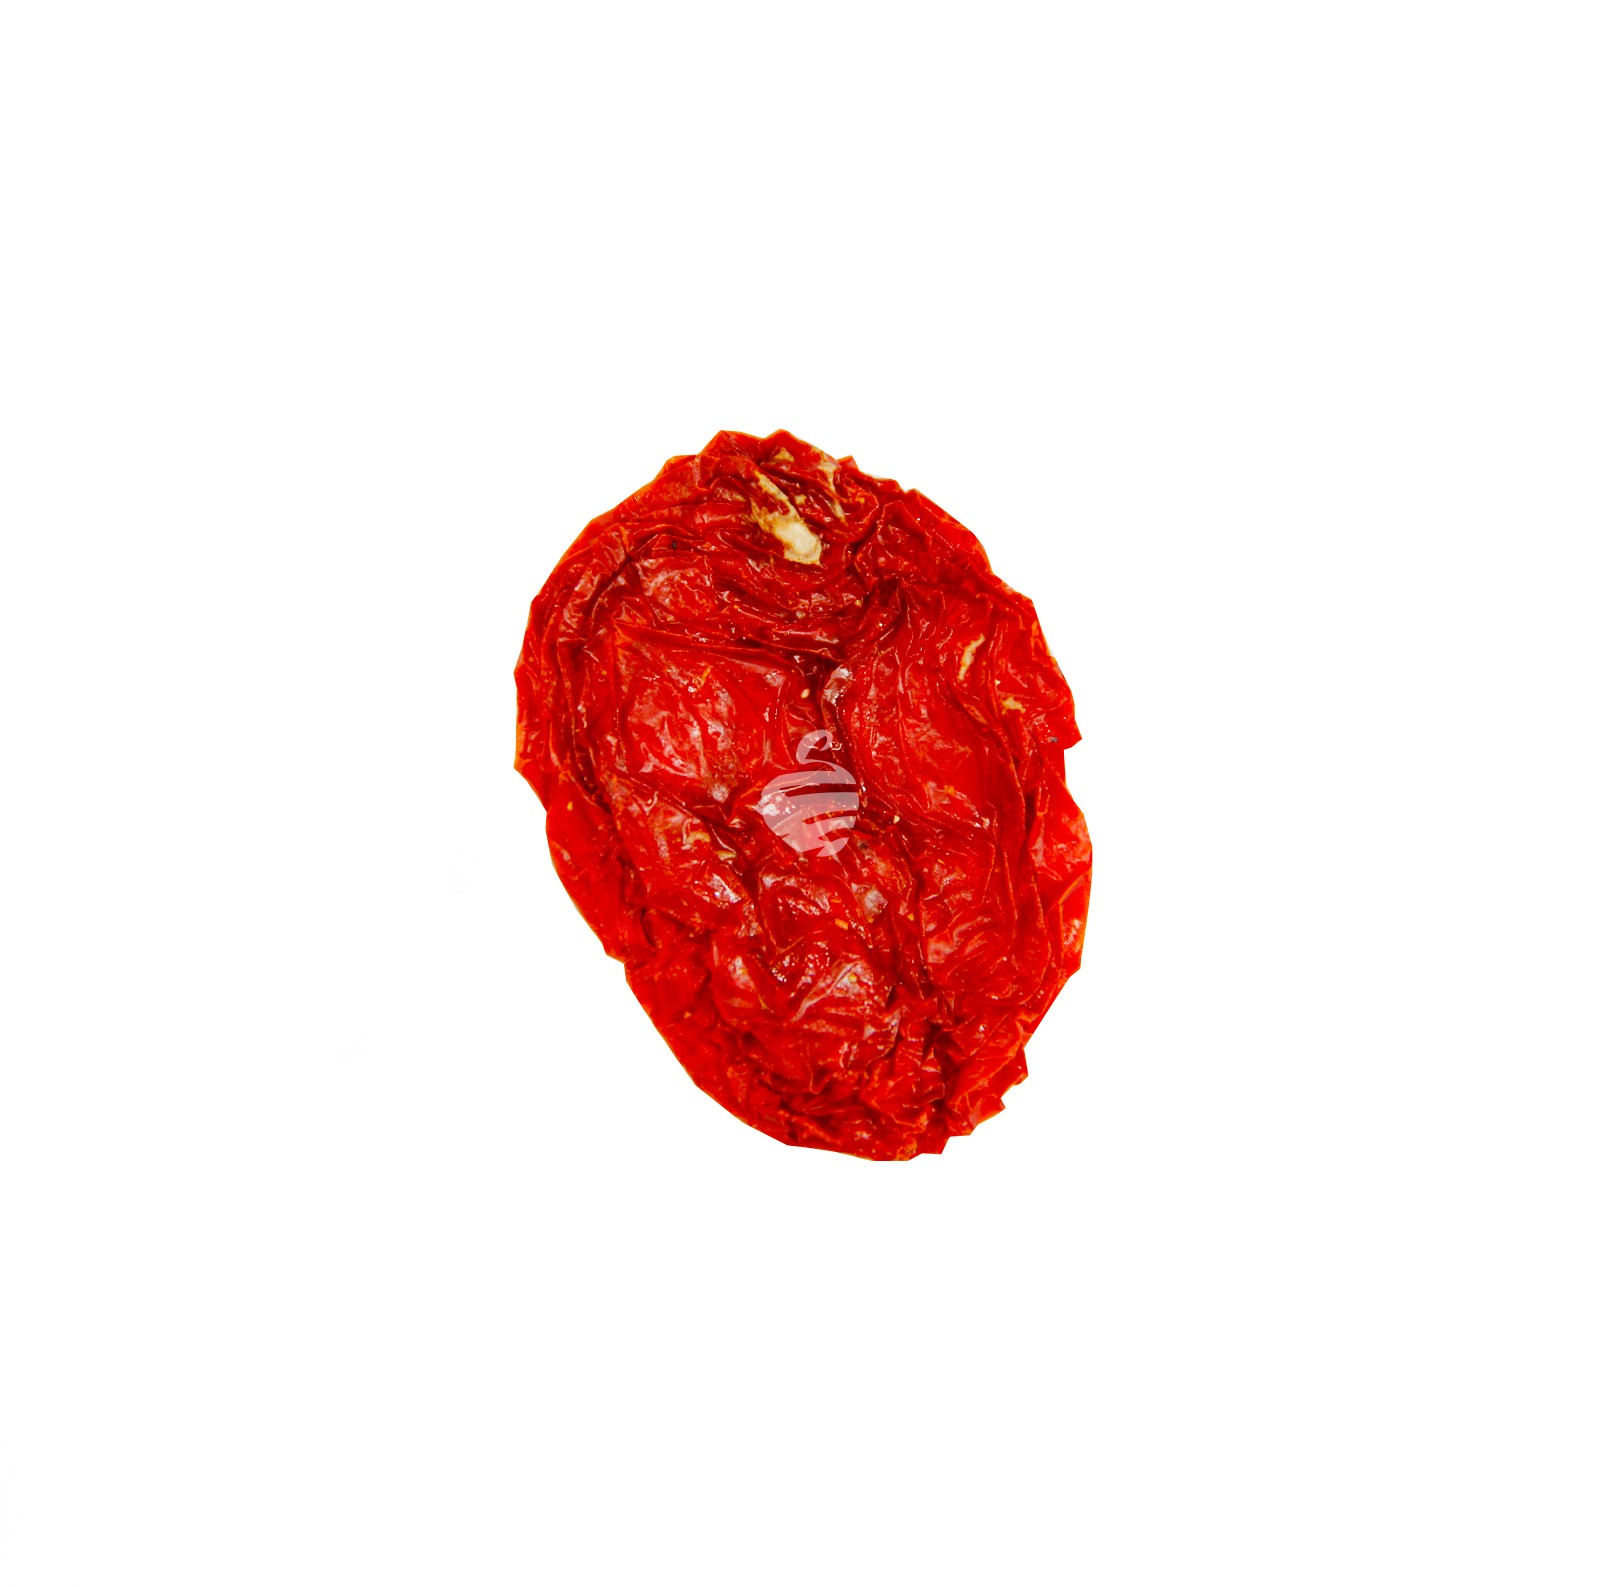 Tomatoes dried